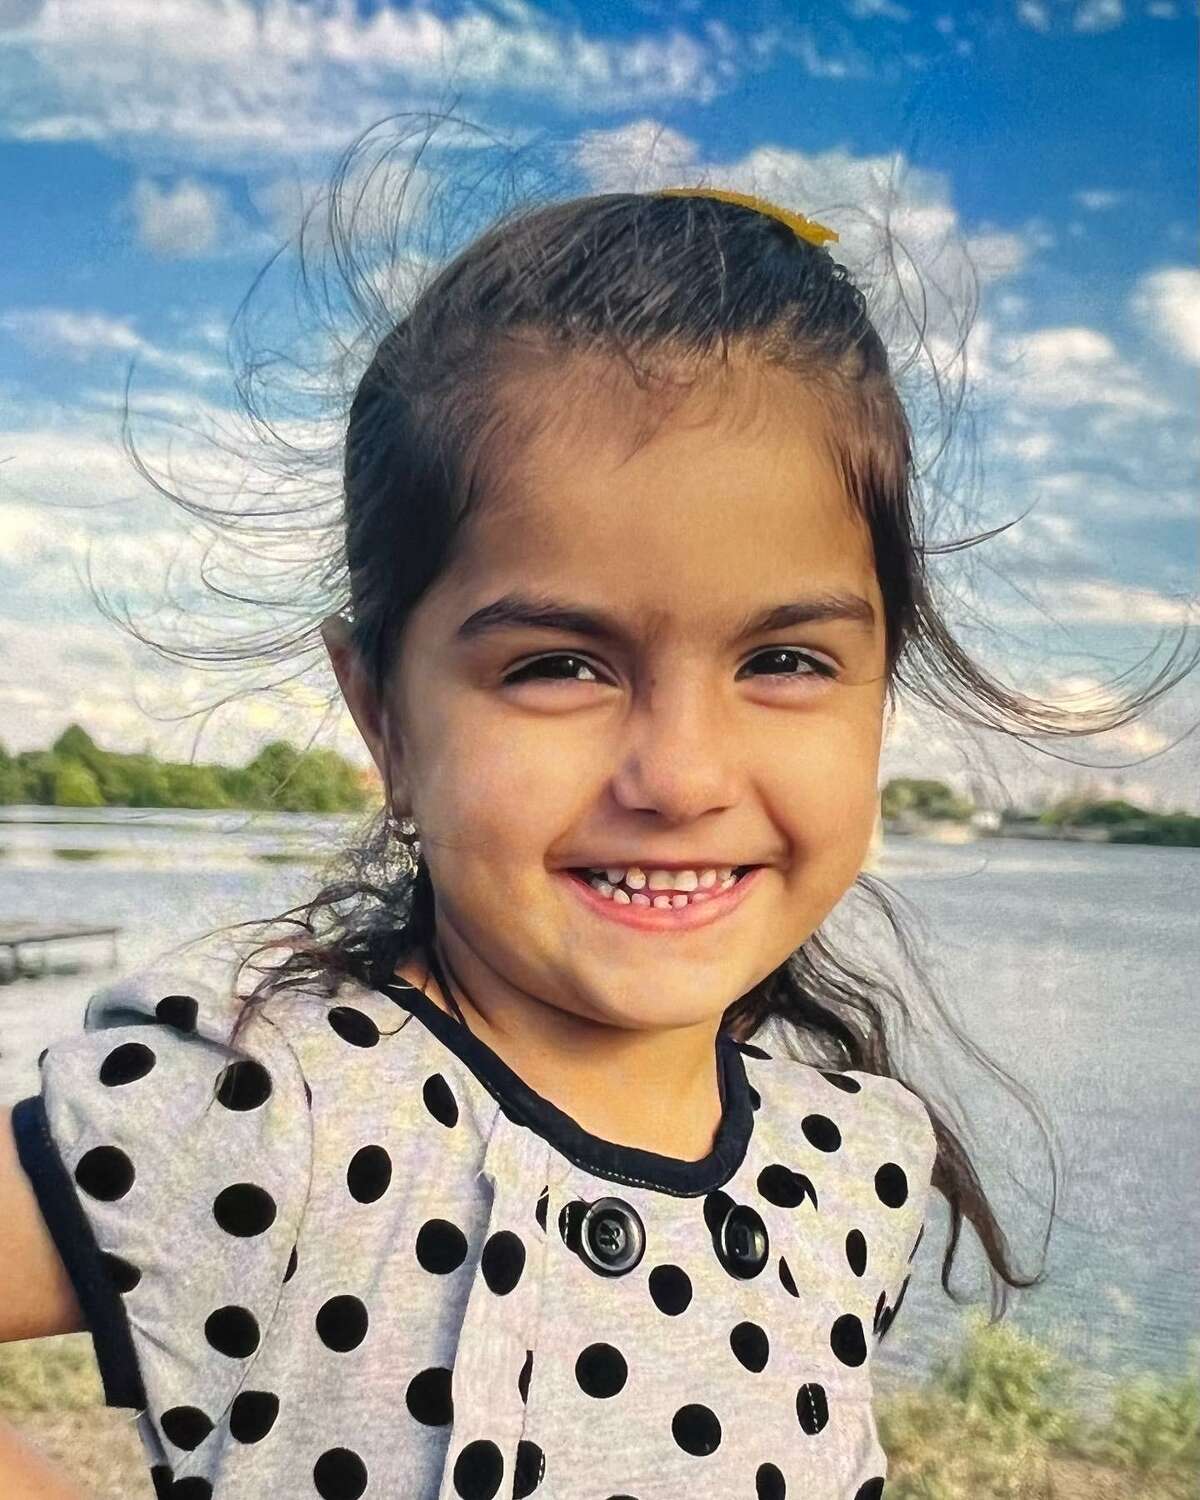 Lina Sardar Khil, 3, has been missing since Dec. 20, 2021, when she disappeared from a playground at the apartment complex where her family lives on Fredericksburg Road in San Antonio.